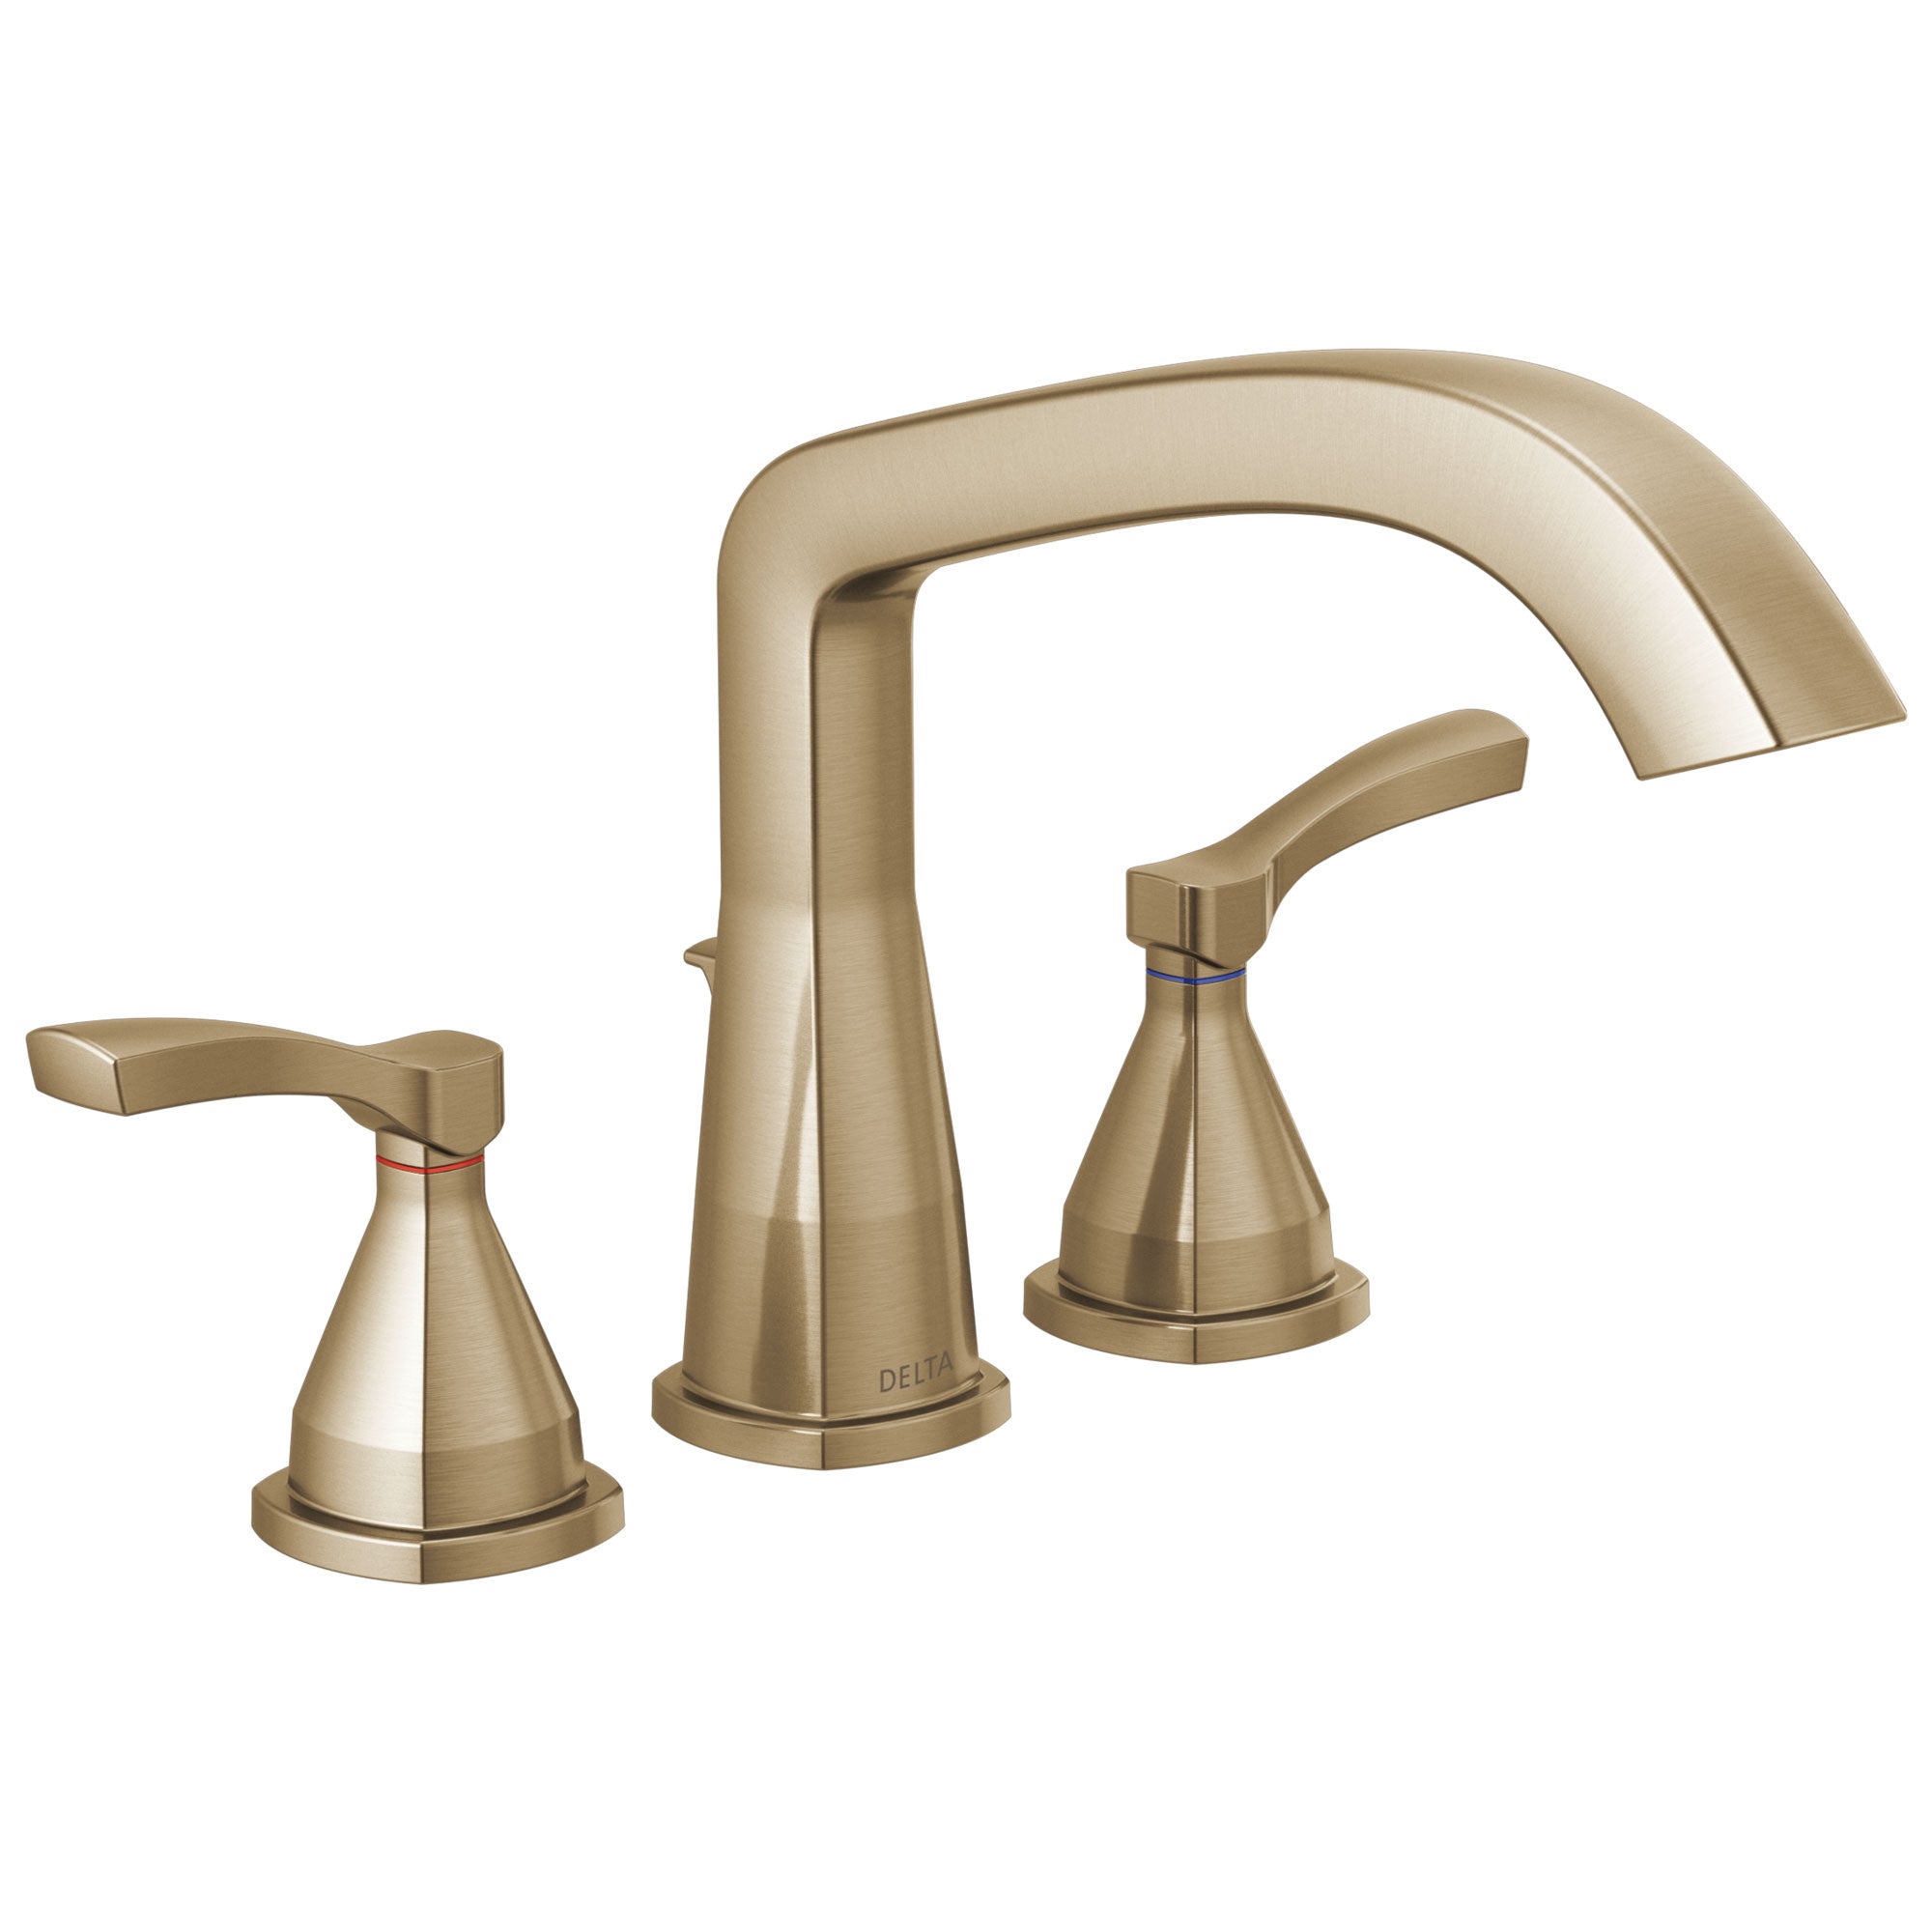 Delta Stryke Collection Champagne Bronze Finish Three Hole Roman Tub Filler Faucet Includes Rough-in Valve and Lever Handles D3156V